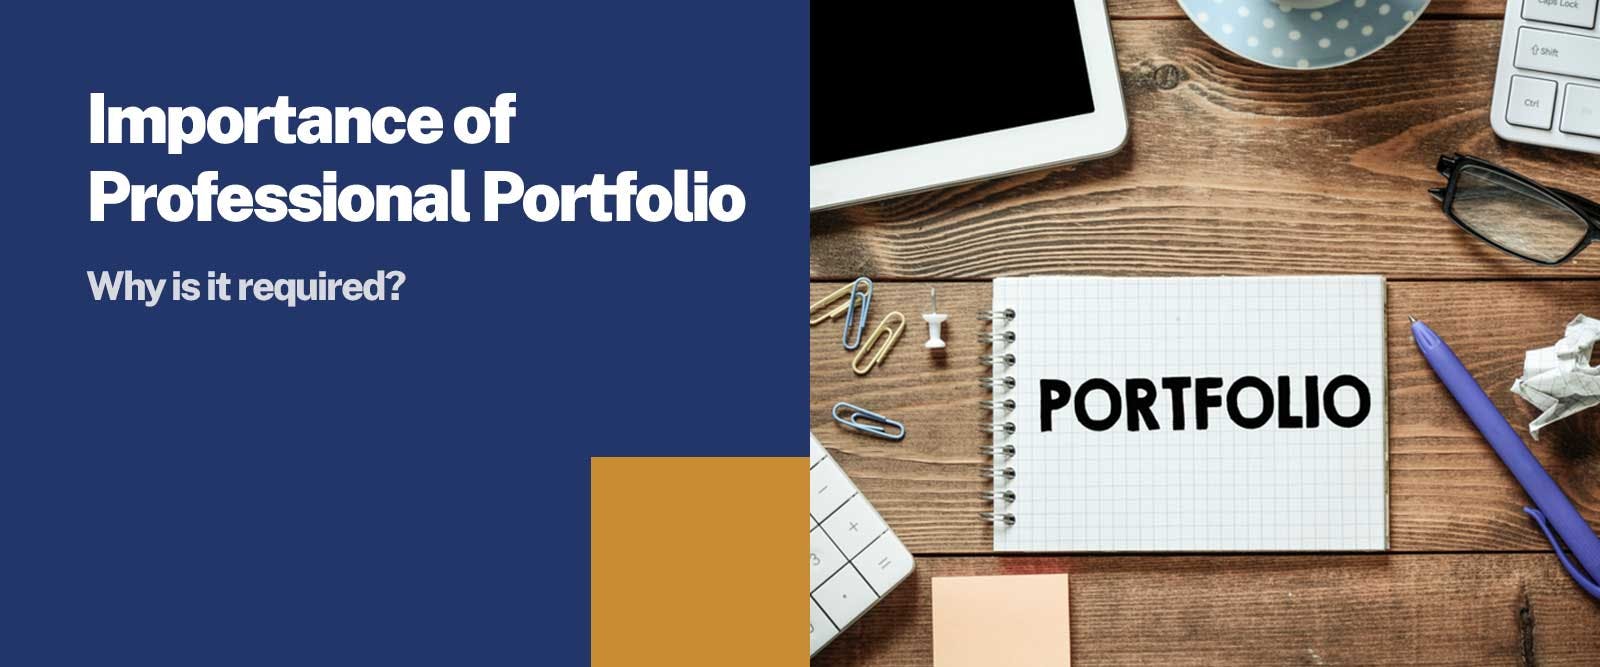 Importance of Professional Portfolio: Why it is required? 